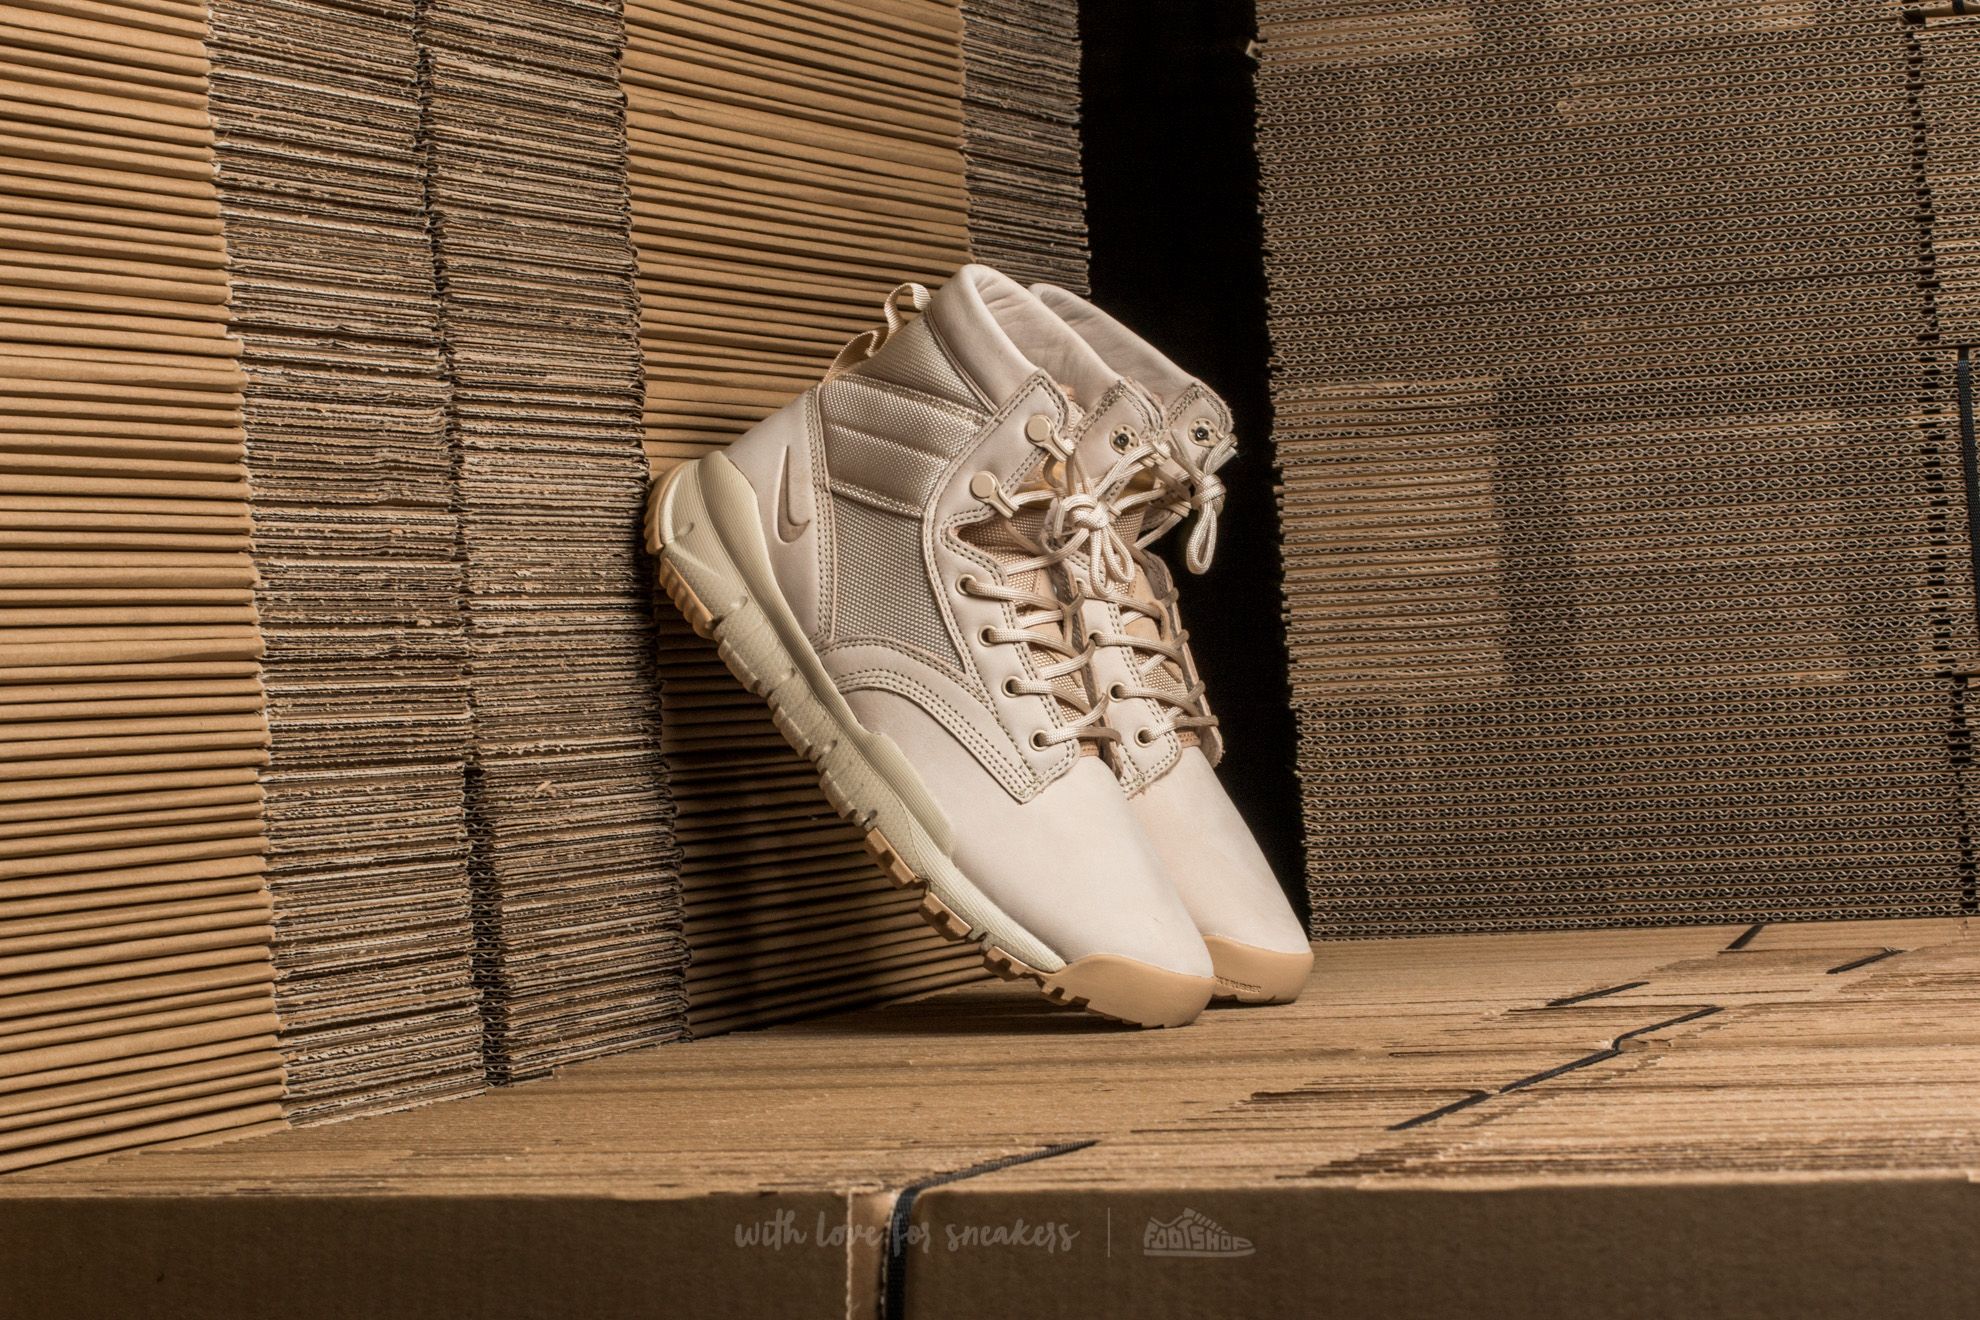 Chaussures et baskets homme Nike SFB 6" NSW Leather Oatmeal/ Oatmeal-Linen